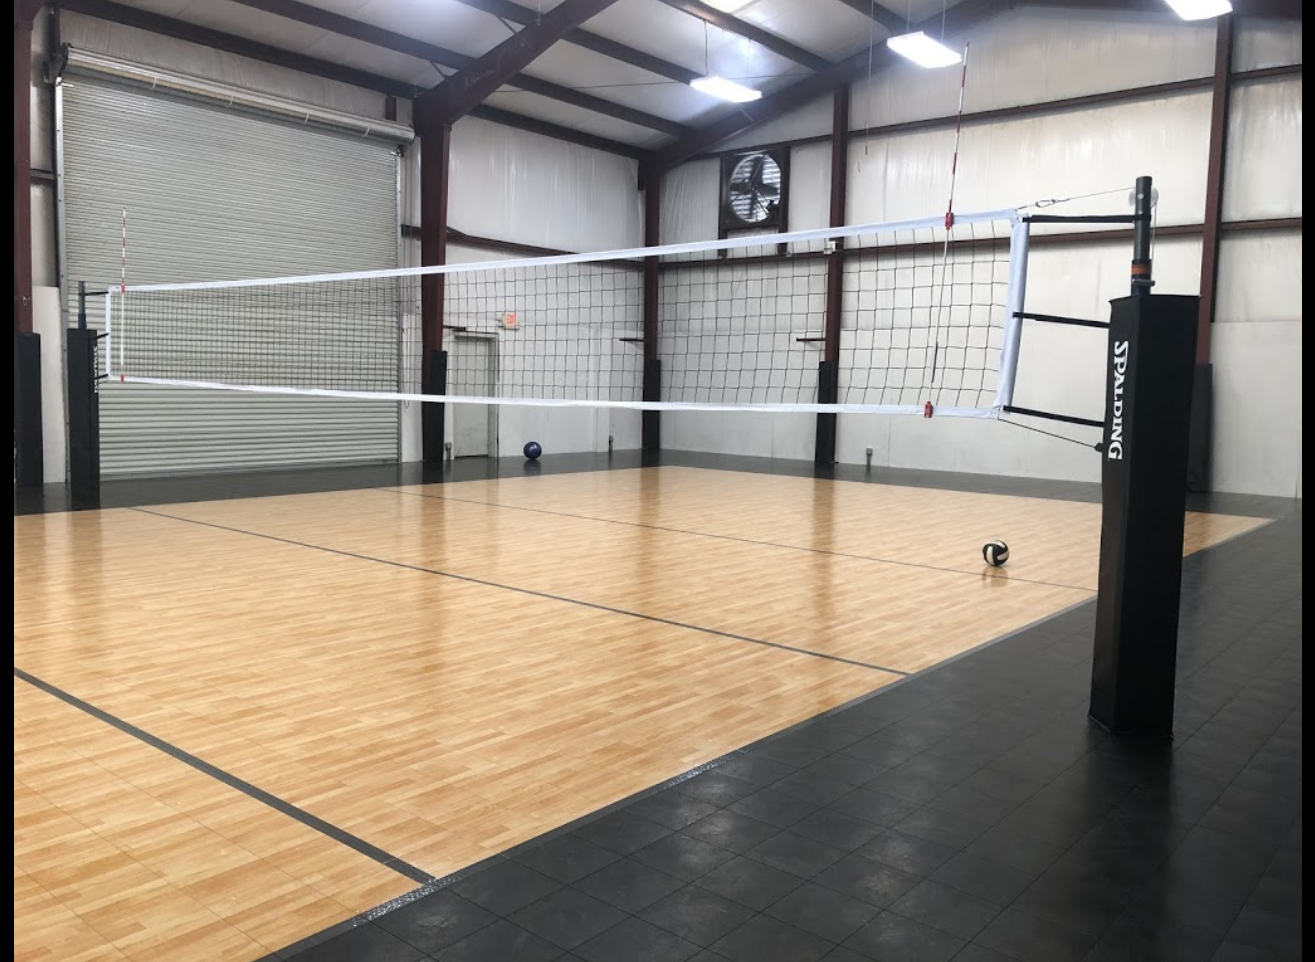 Facility — Queen City Athletics Volleyball Club